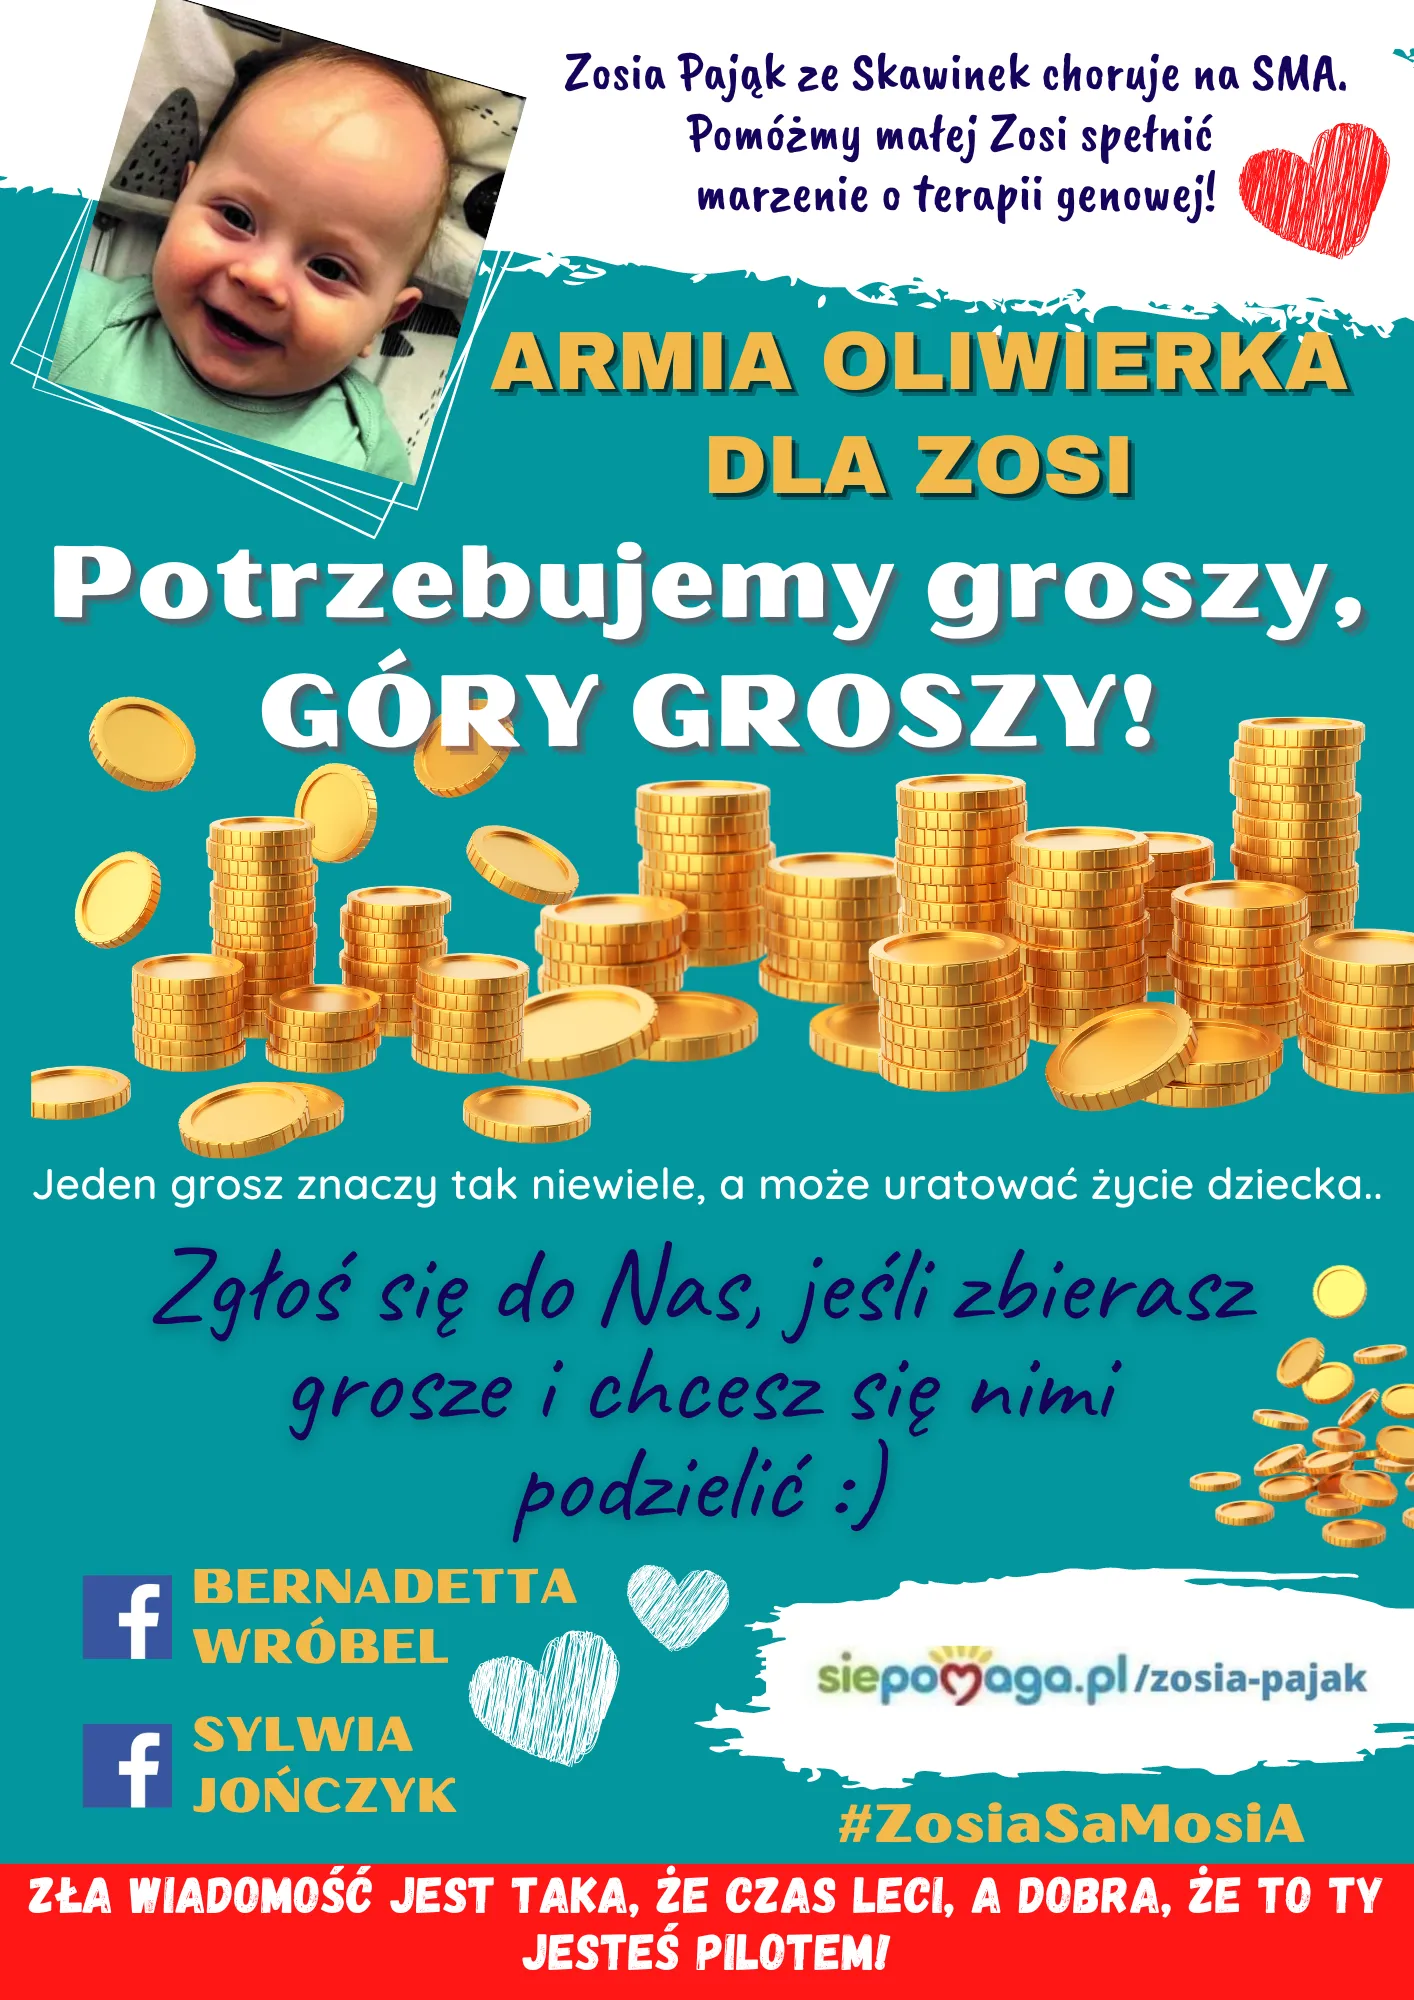 You are currently viewing Góra Groszy dla ZOSI